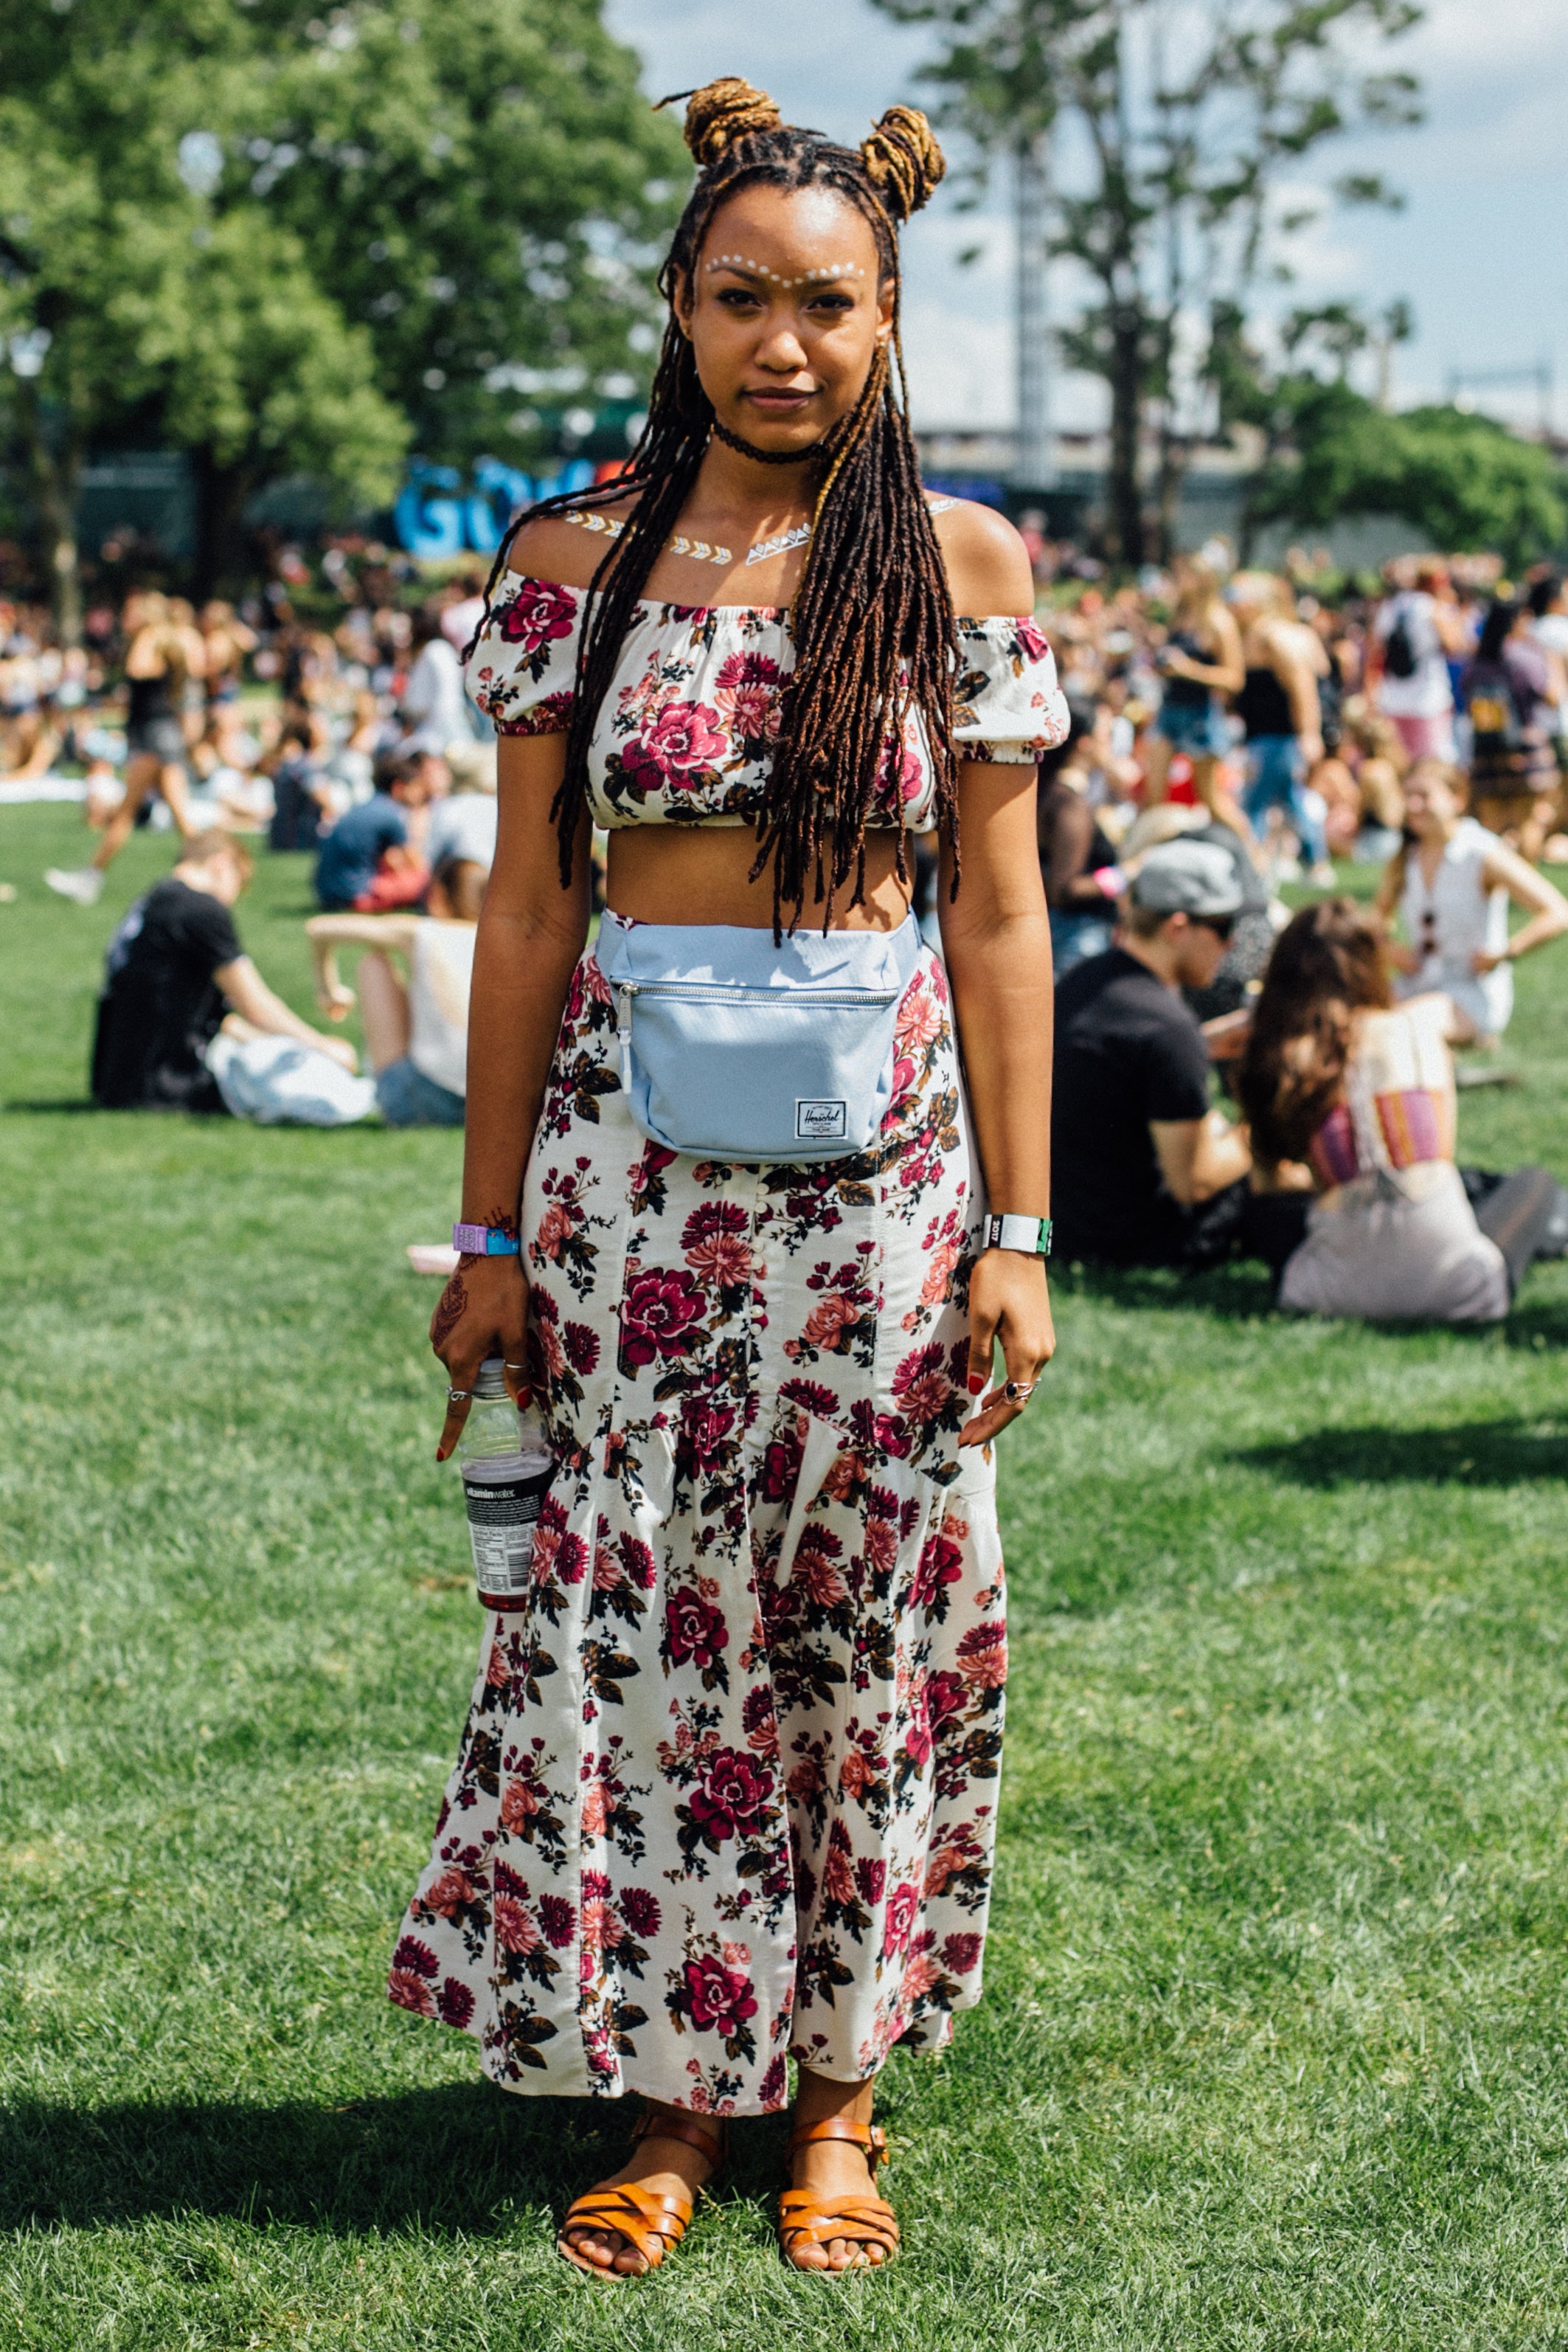 Beautiful Black Women Took Over the Governors Ball Street Style Scene
